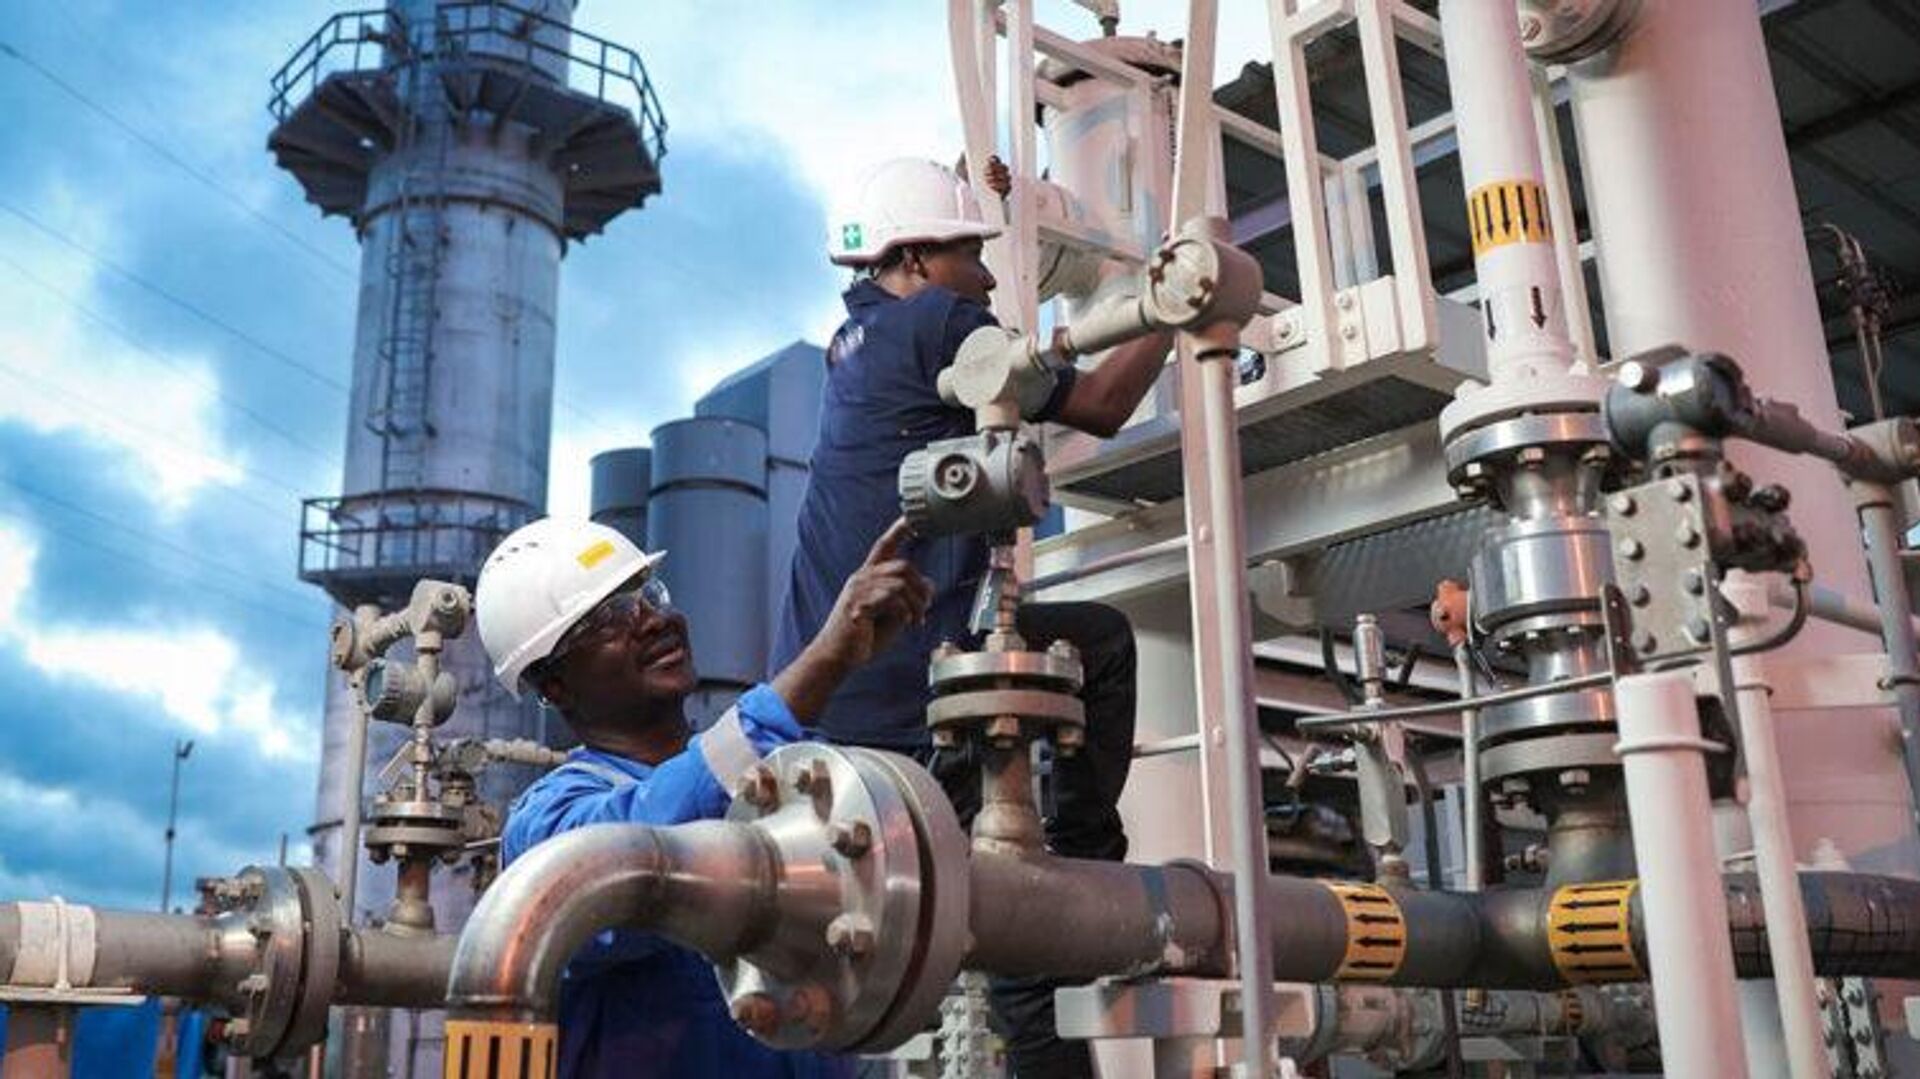 Tanzania to boost production from Mnazi Bay natural gas field.